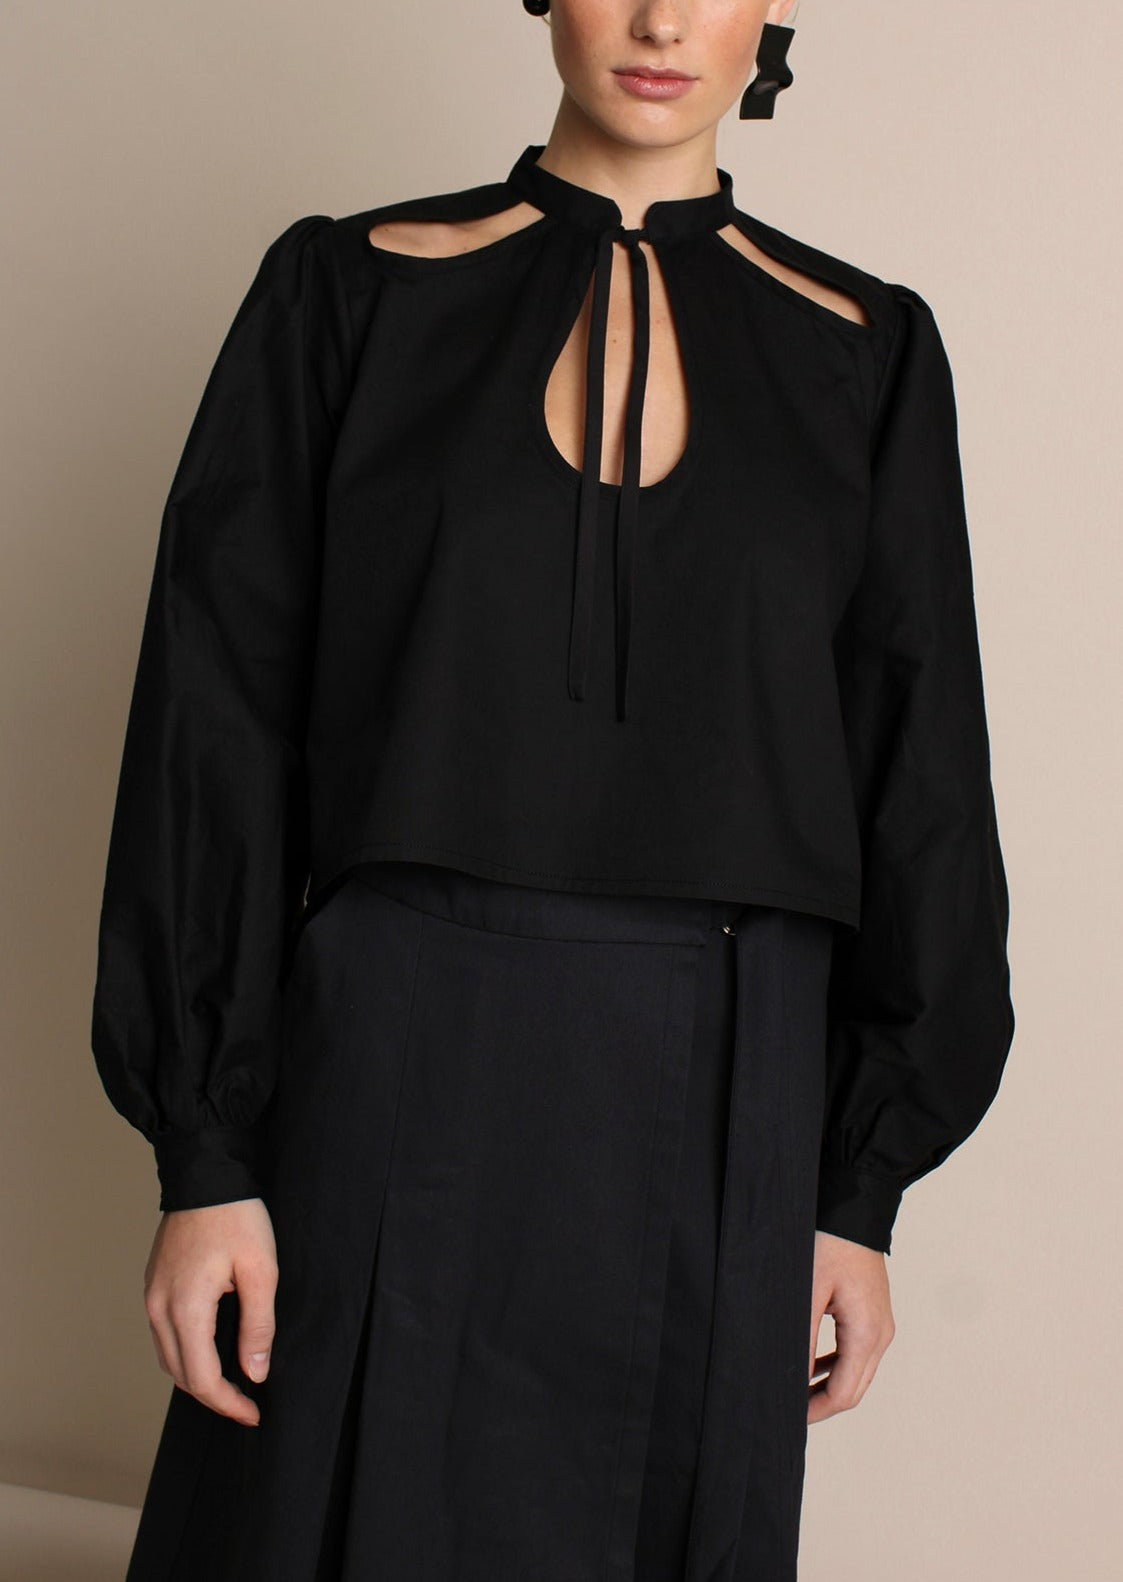 THE ANNE BLOUSE - size XS/S